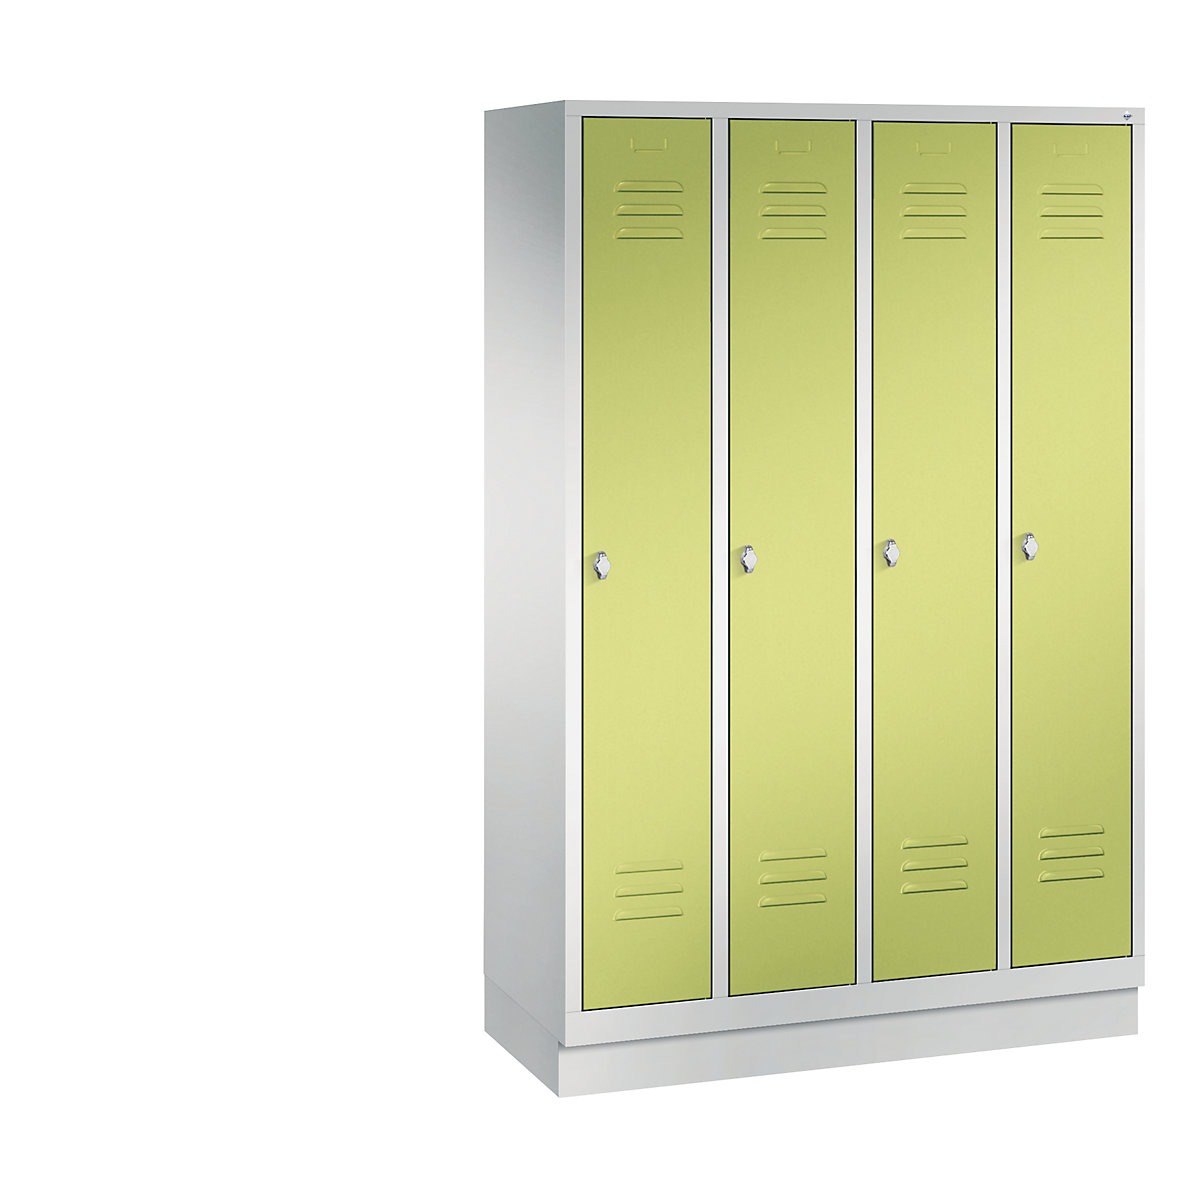 CLASSIC cloakroom locker with plinth – C+P, 4 compartments, compartment width 300 mm, light grey / viridian green-2